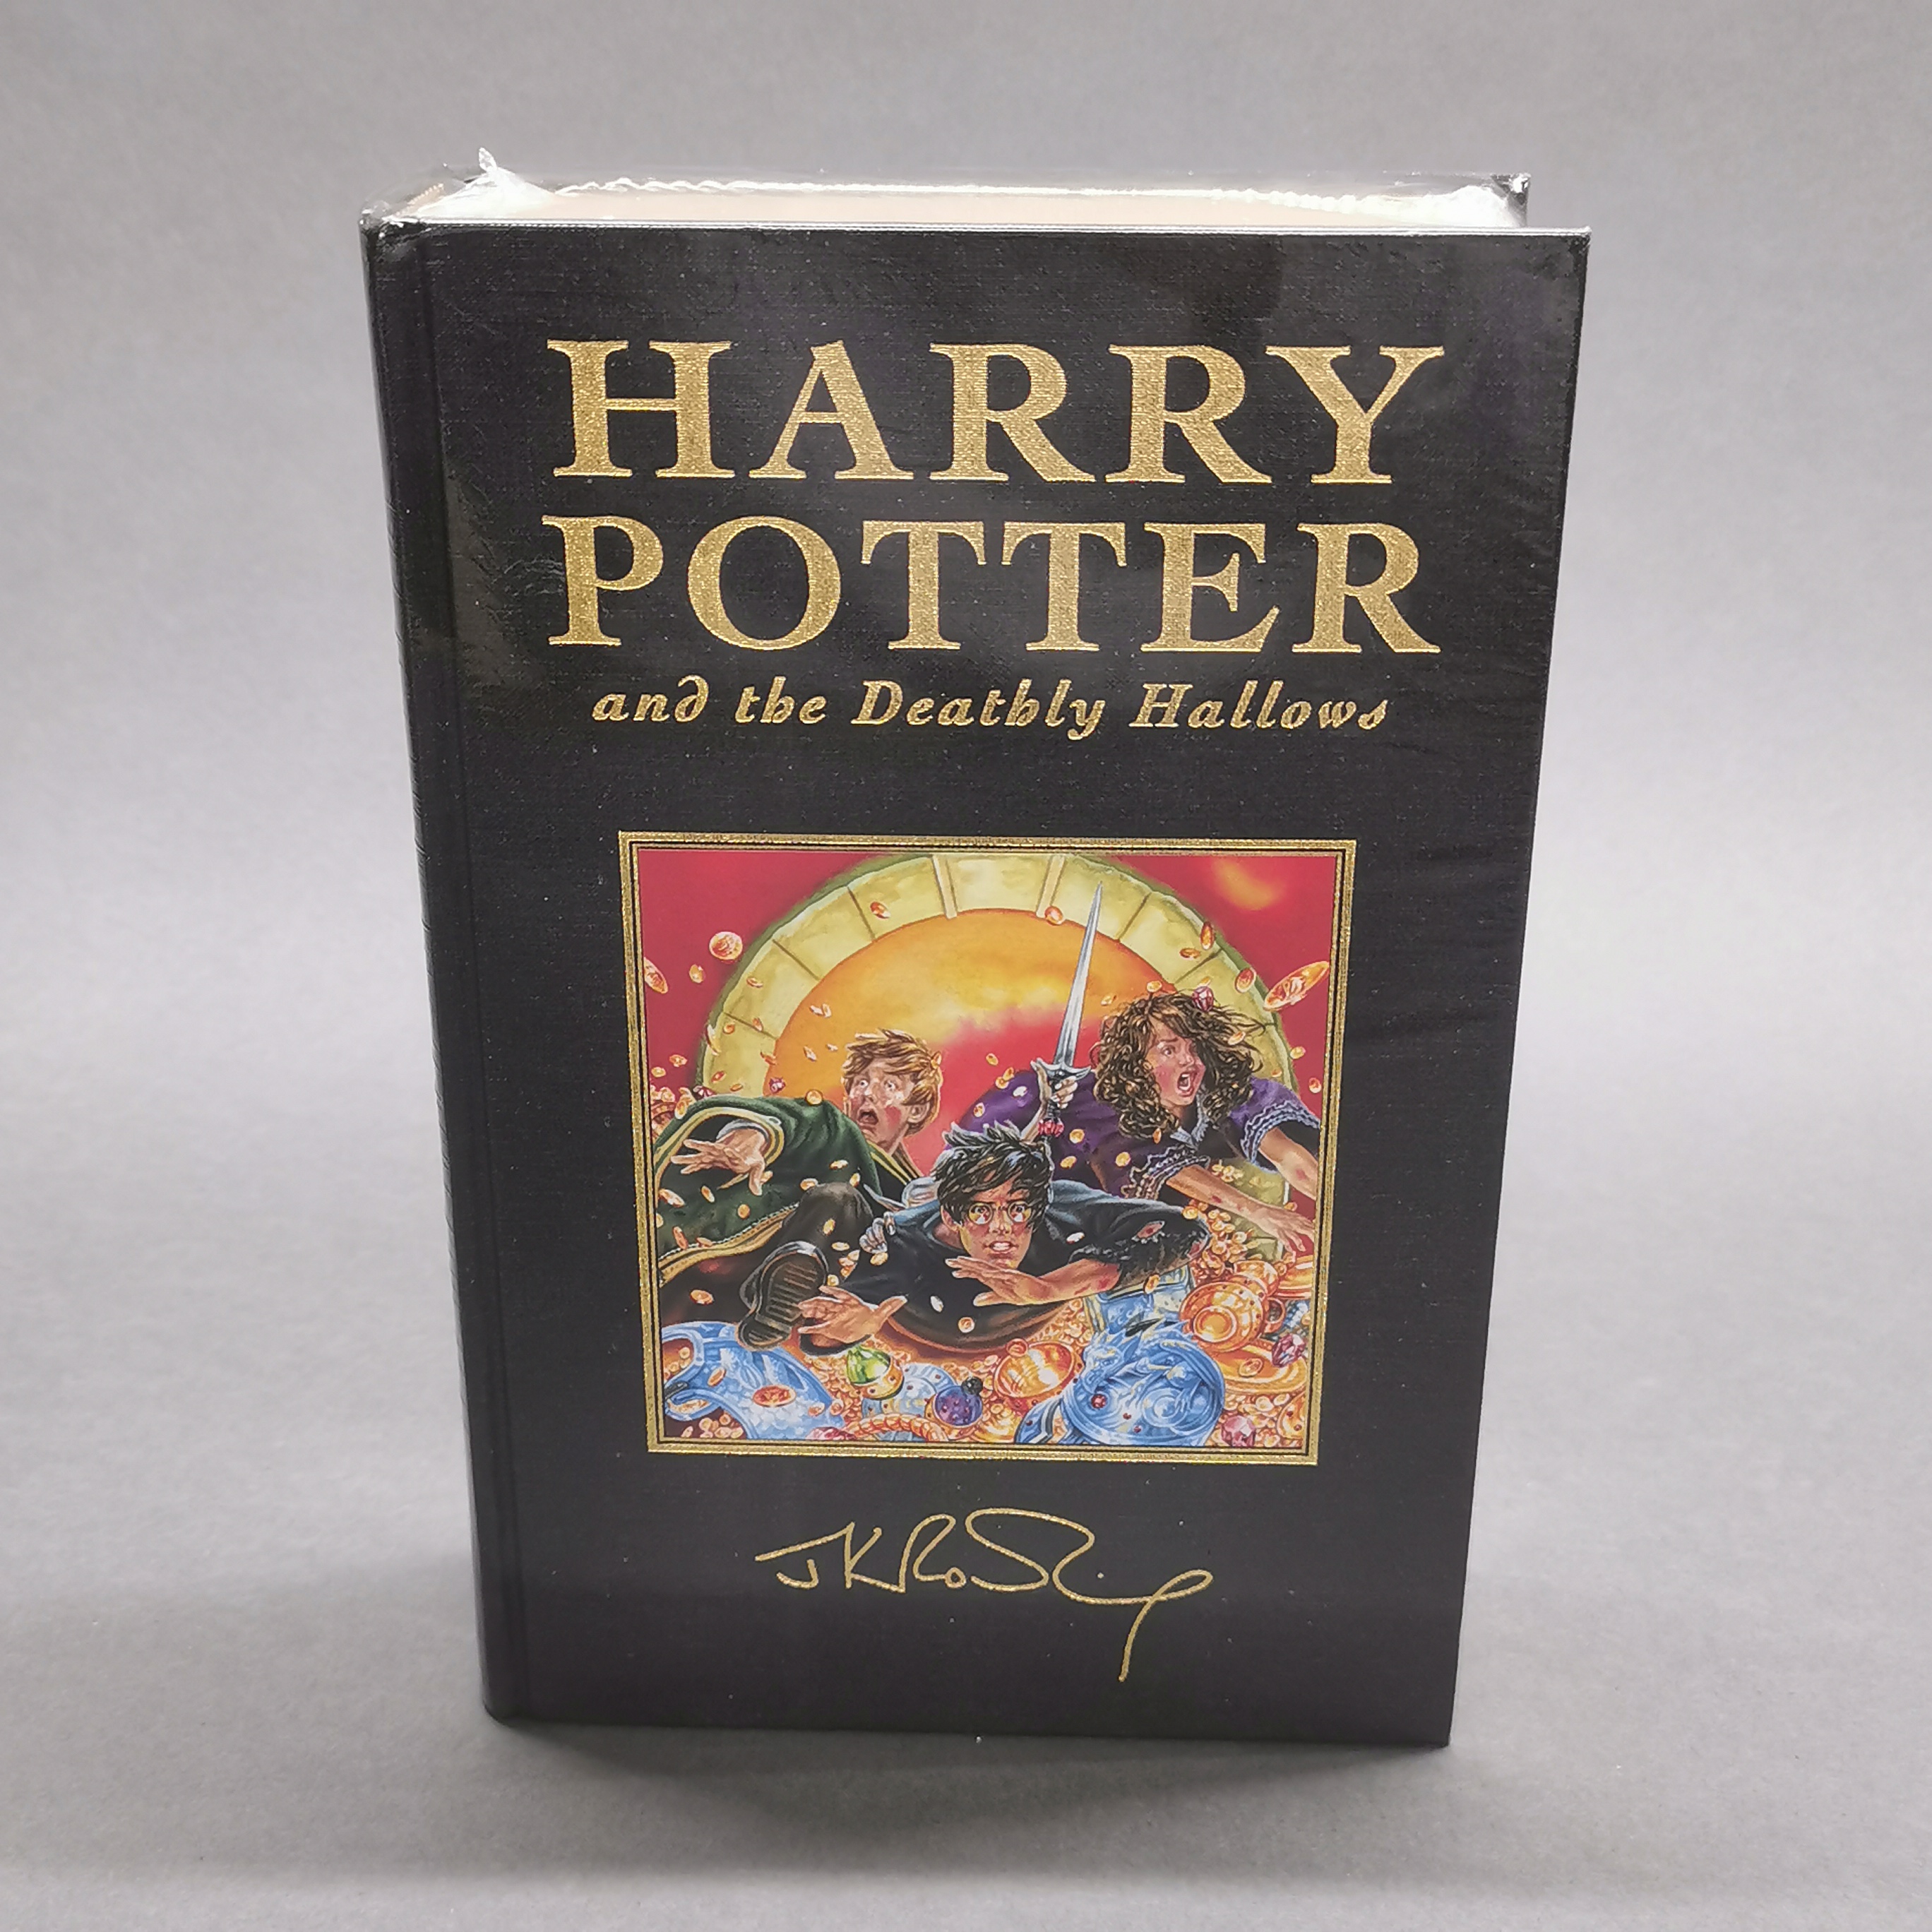 A first edition sealed hardback Harry Potter and the Deathly Hallows novel.